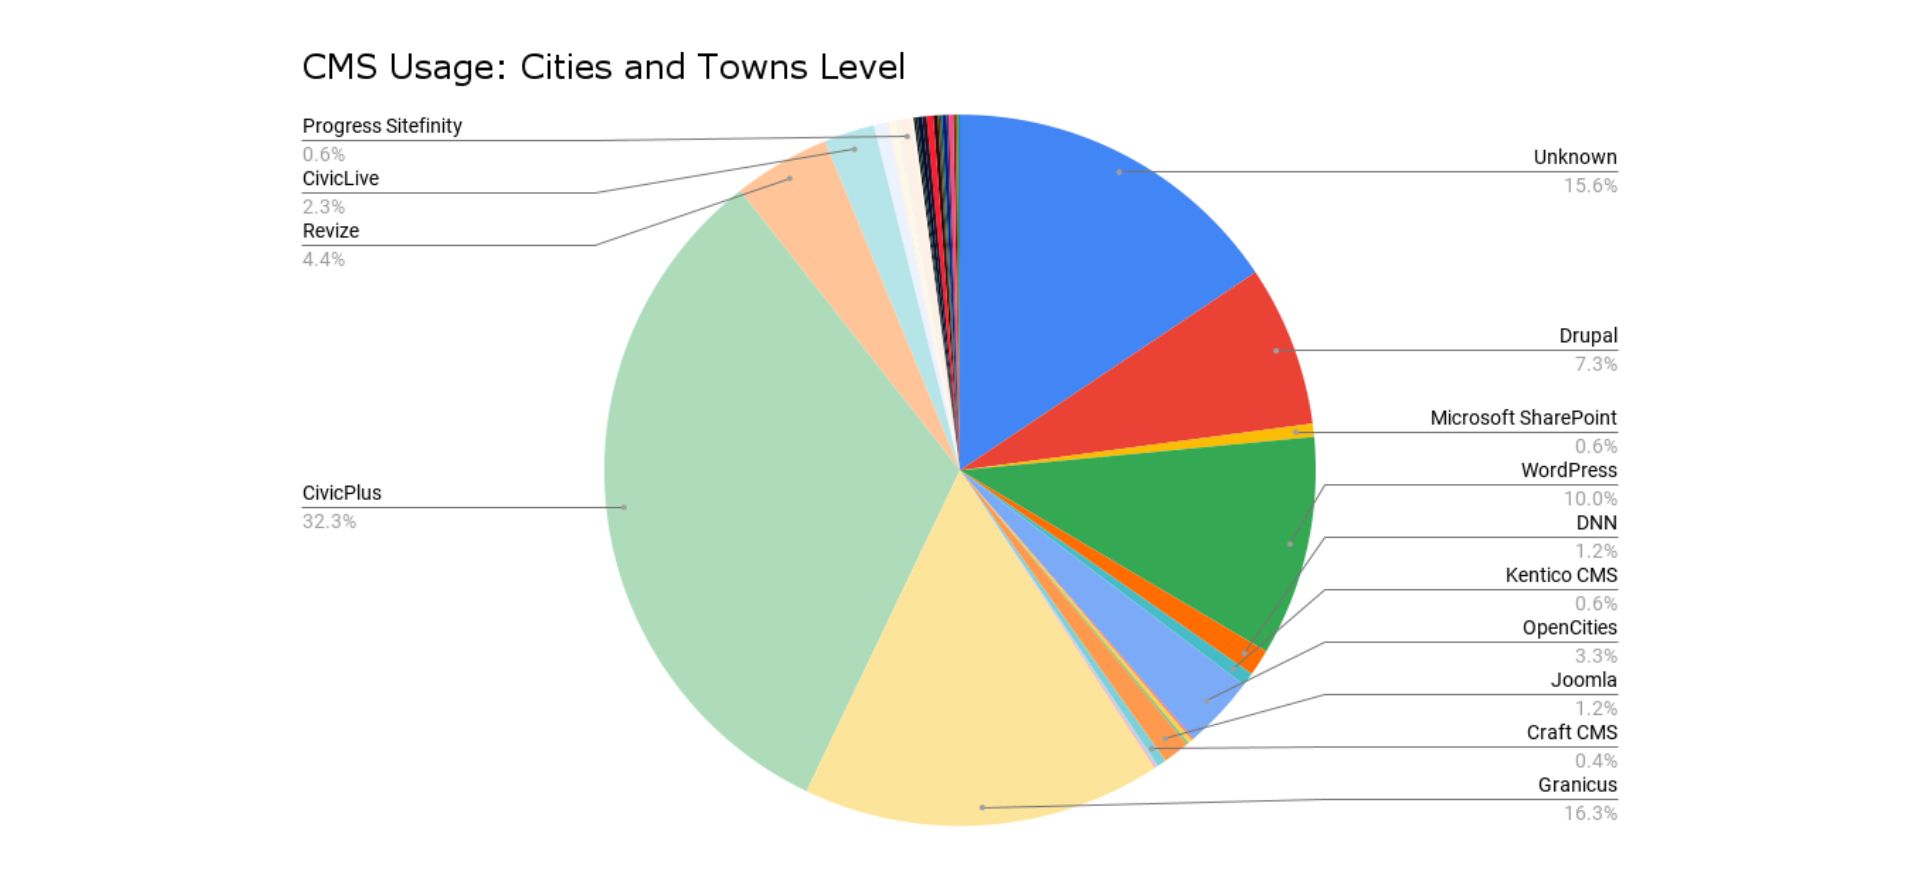 cms usage: cities and towns level